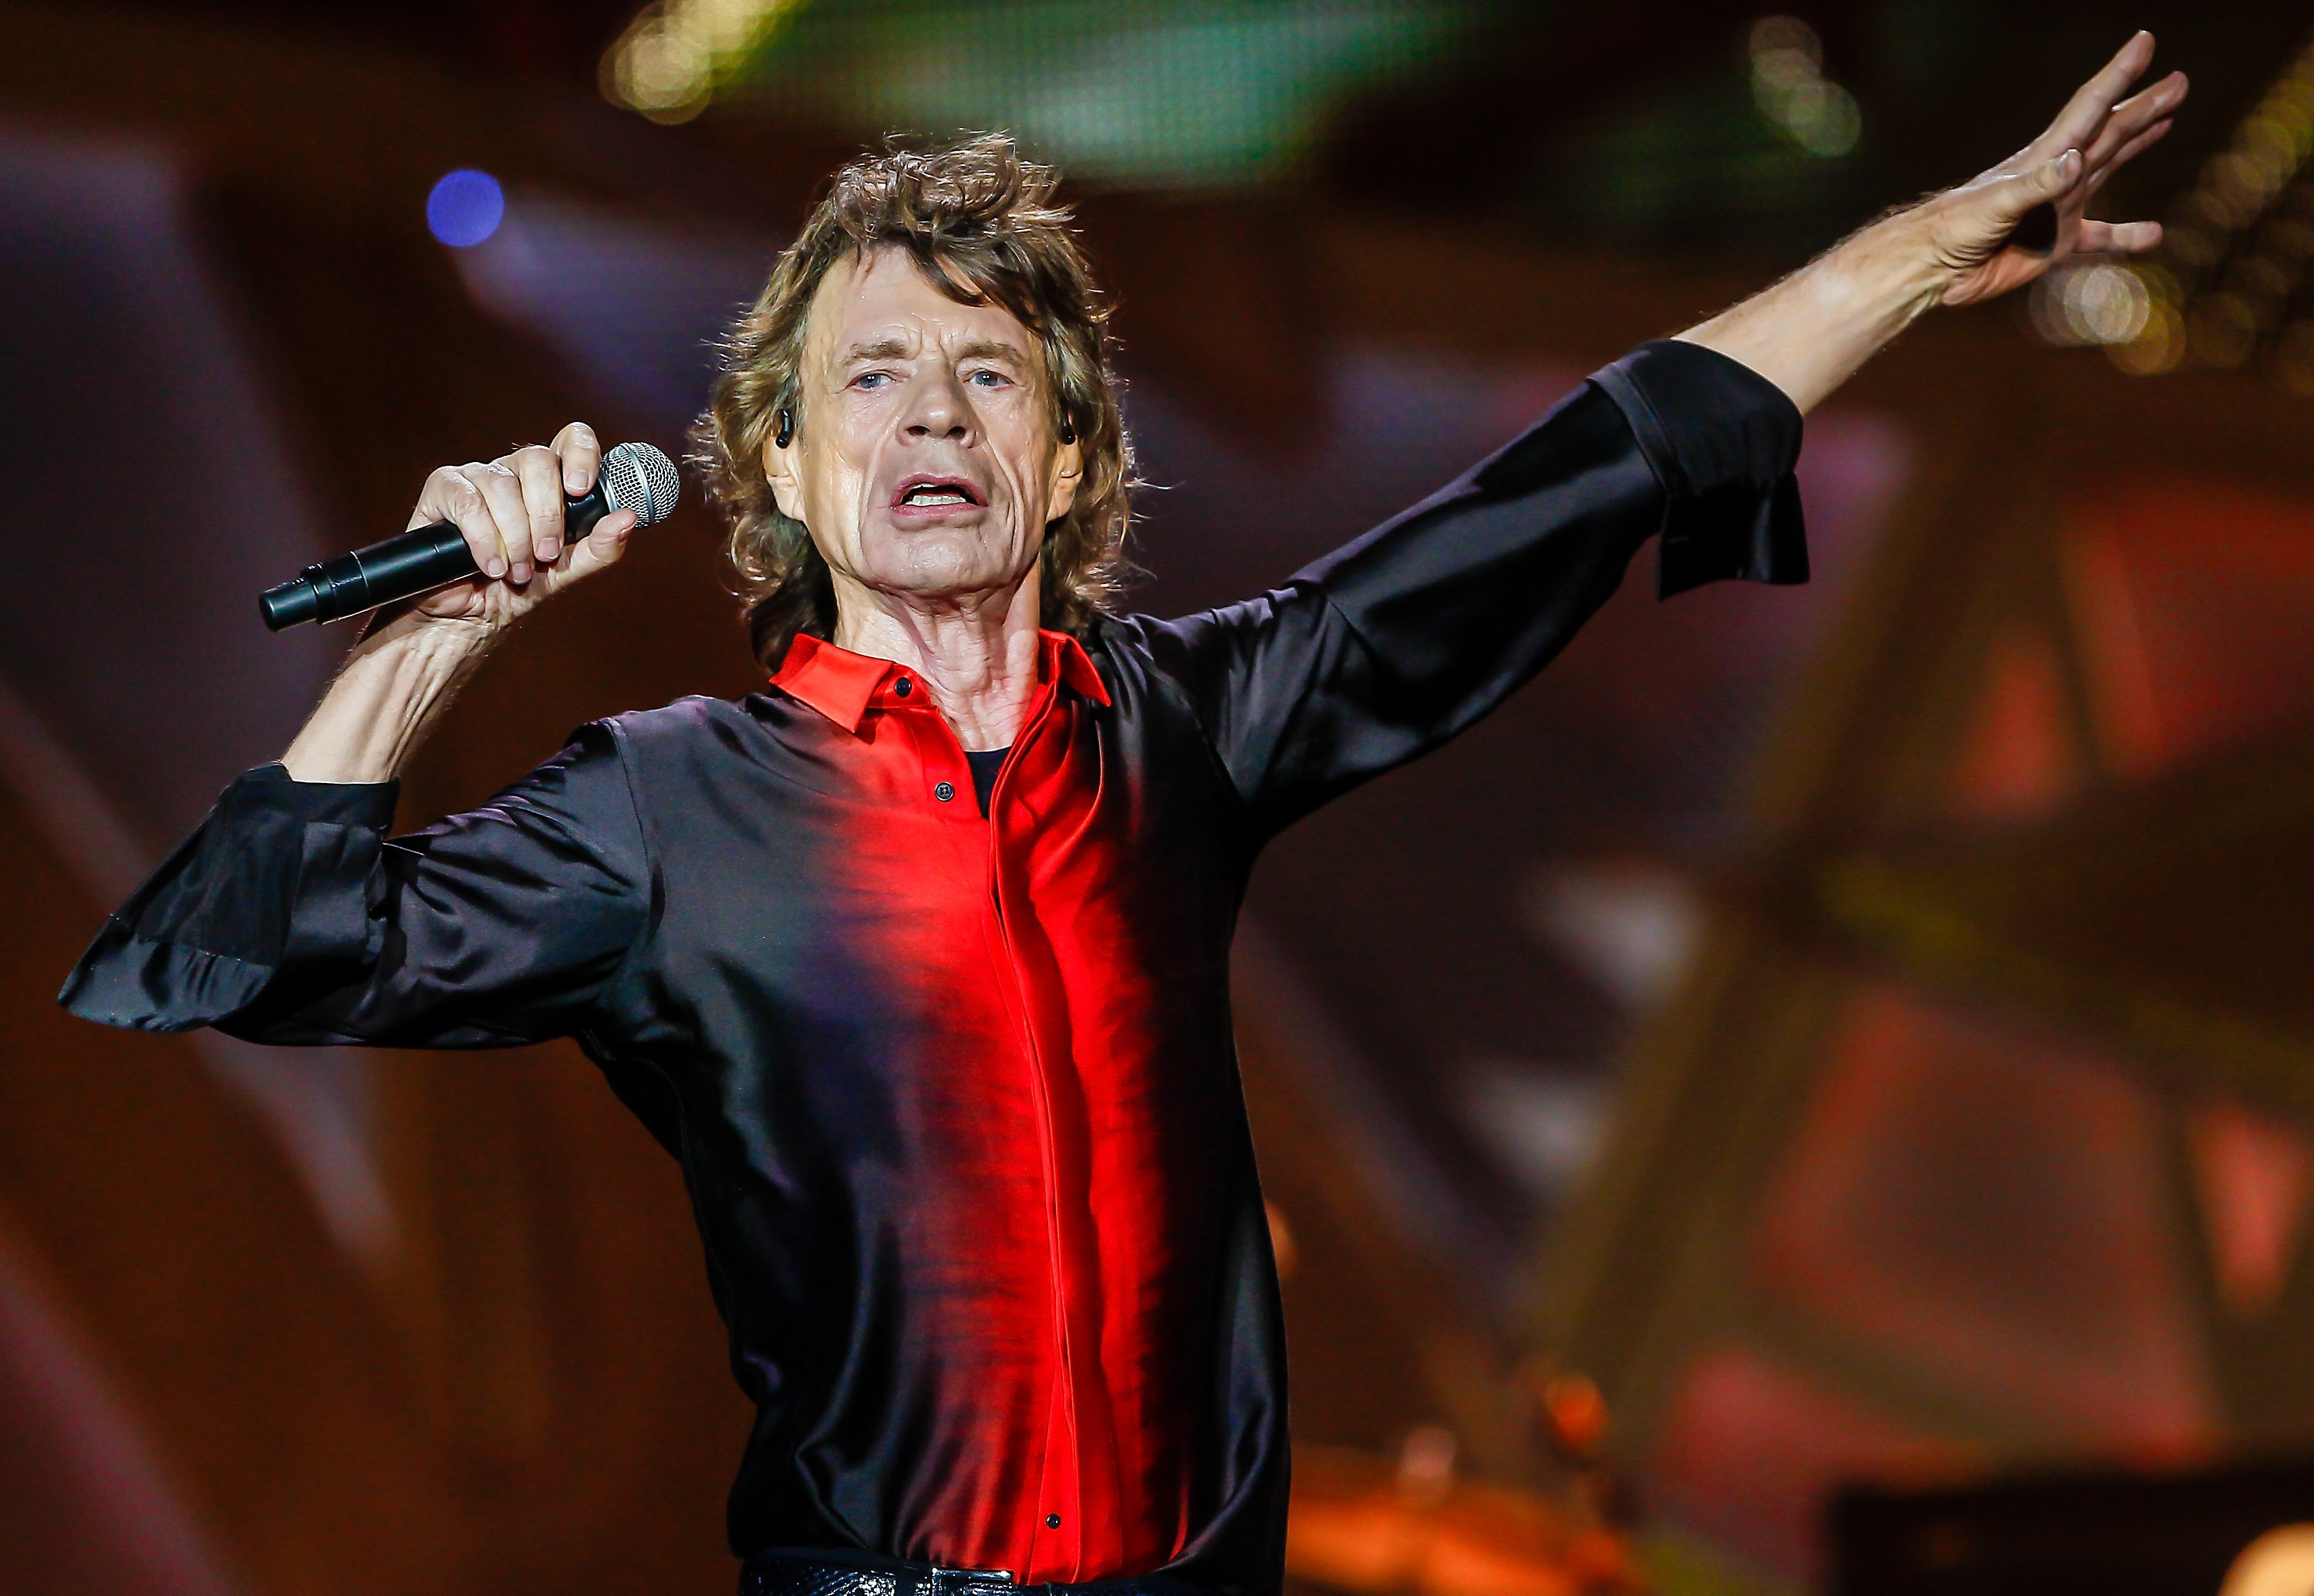 Mick Jagger of The Rolling Stones performs at the Indianapolis Motor Speedway on July 4, 2015 in Indianapolis, Indiana. | Photo by Michael Hickey/Getty Images